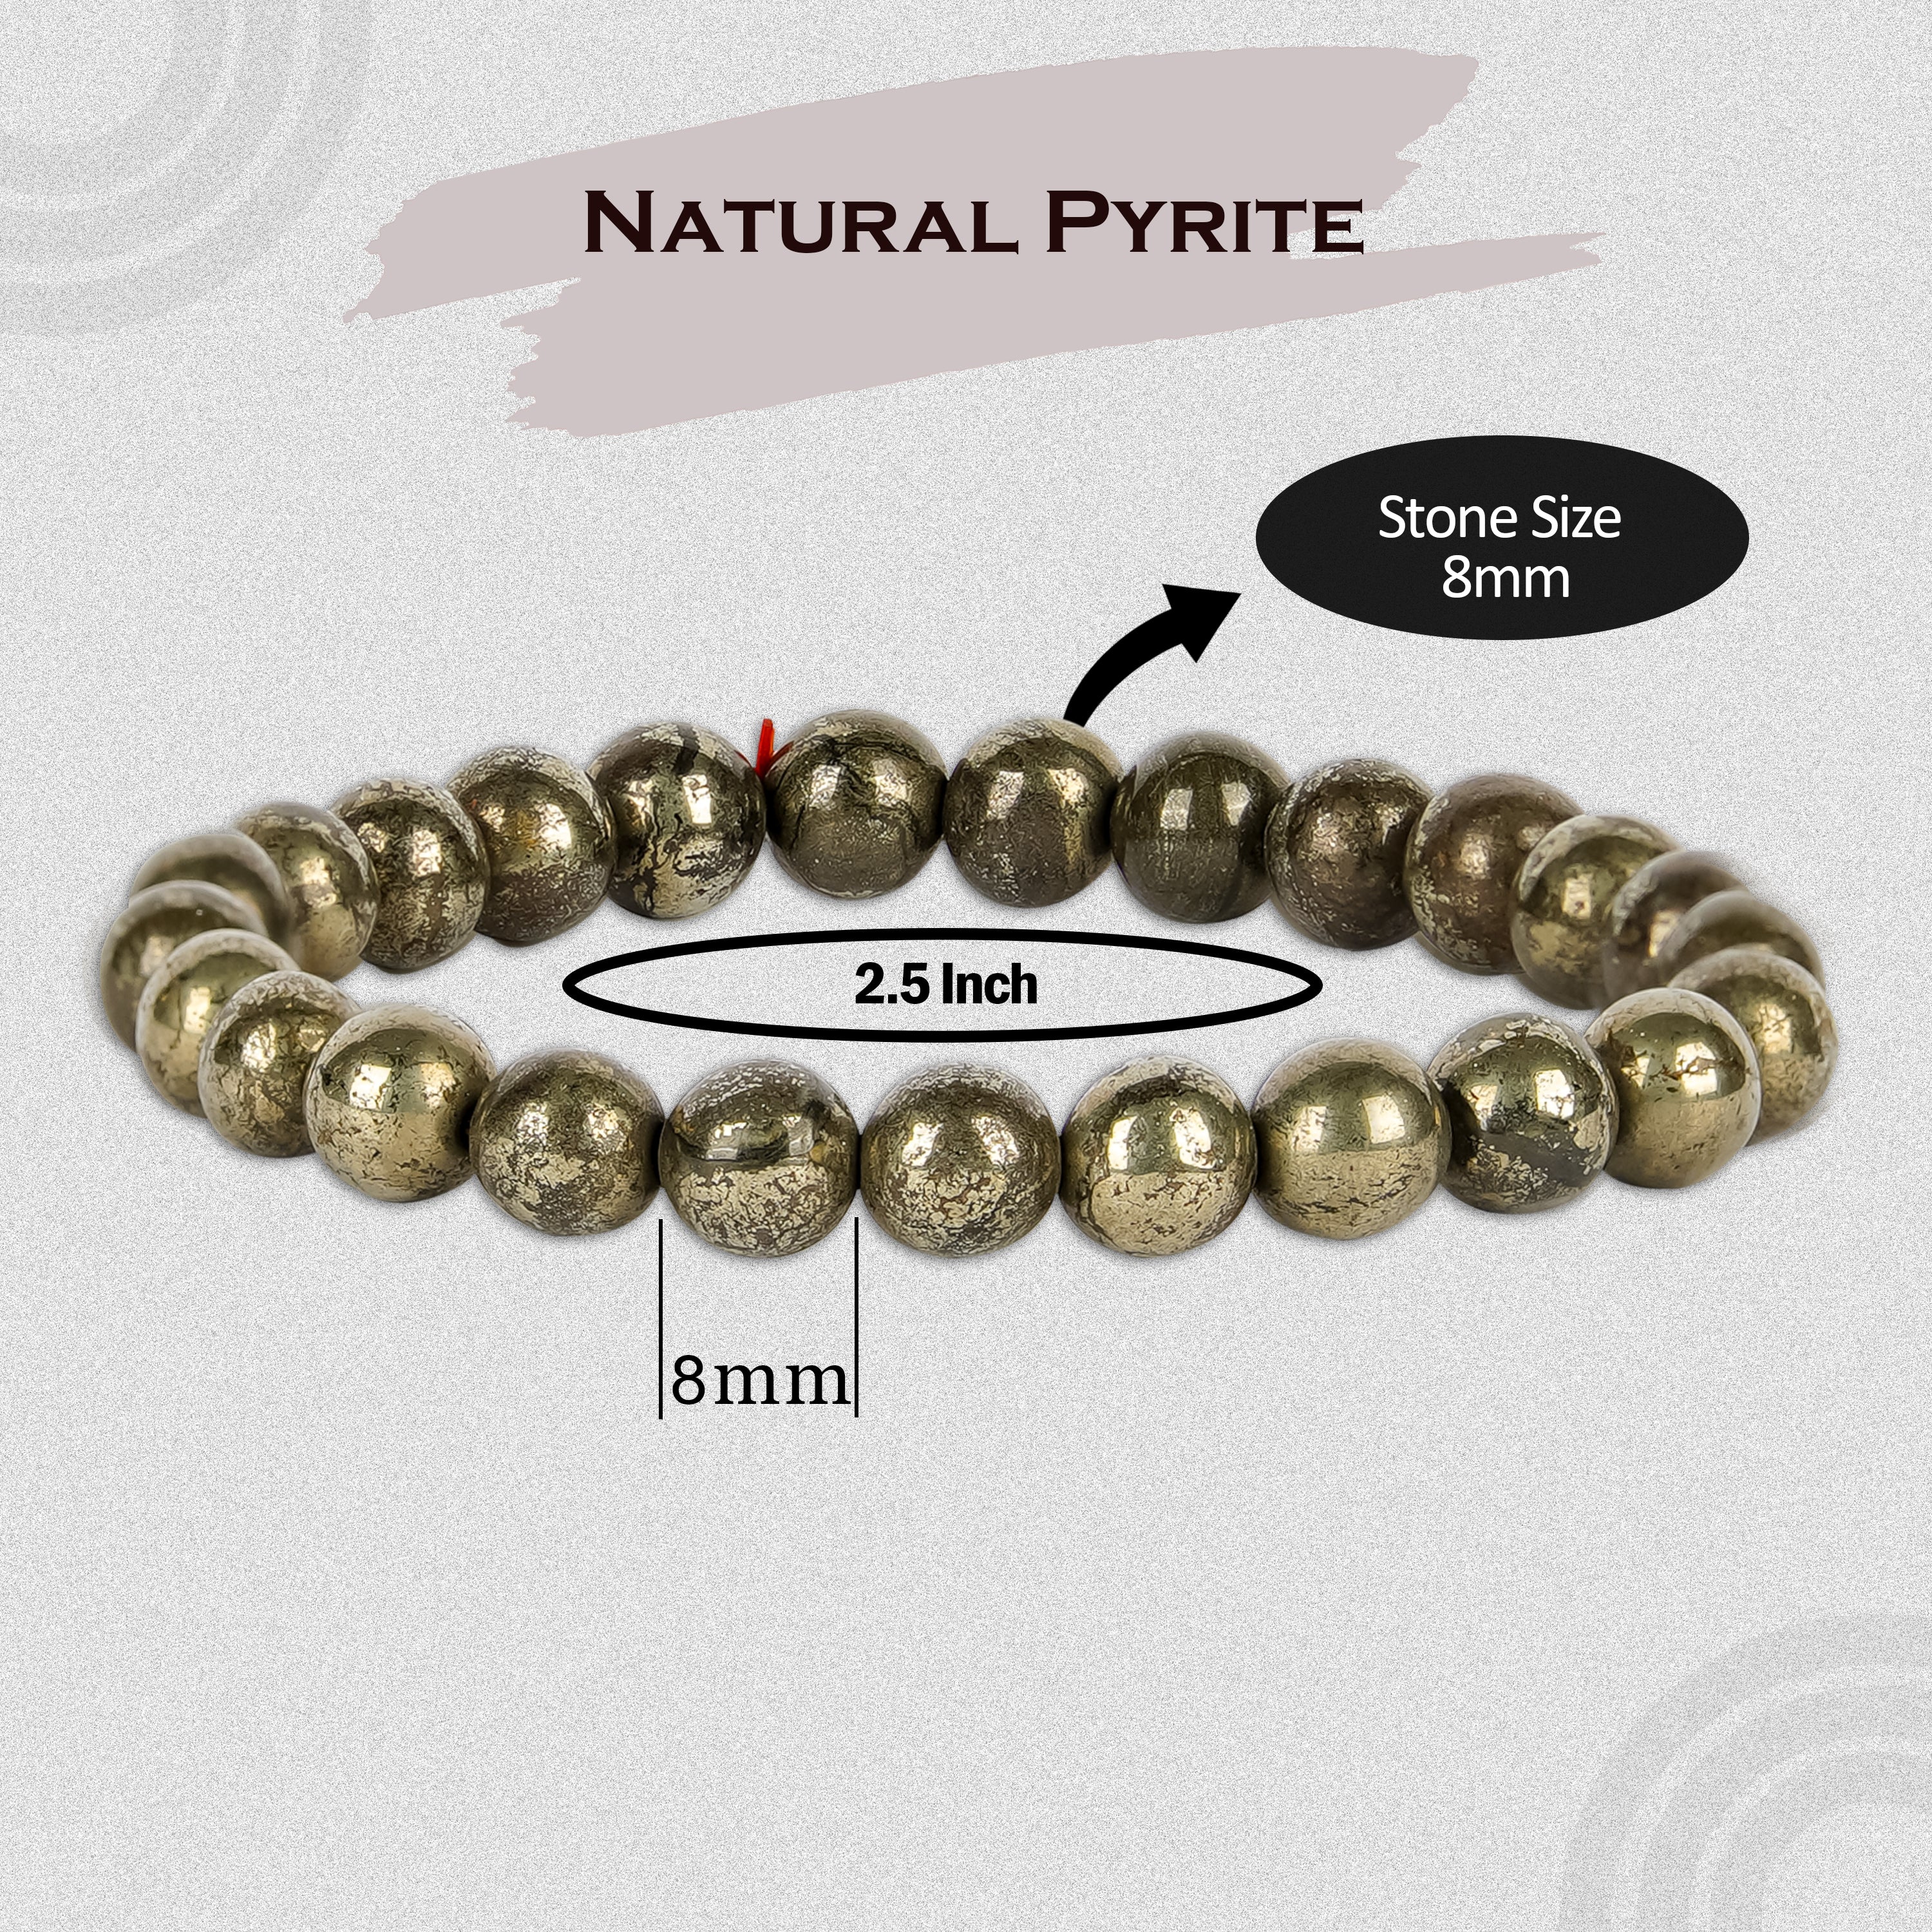 REIKI CRYSTAL PRODUCTS Natural Pyrite Exotic Bracelet White Gold Bracelet  Price in India - Buy REIKI CRYSTAL PRODUCTS Natural Pyrite Exotic Bracelet  White Gold Bracelet online at Flipkart.com